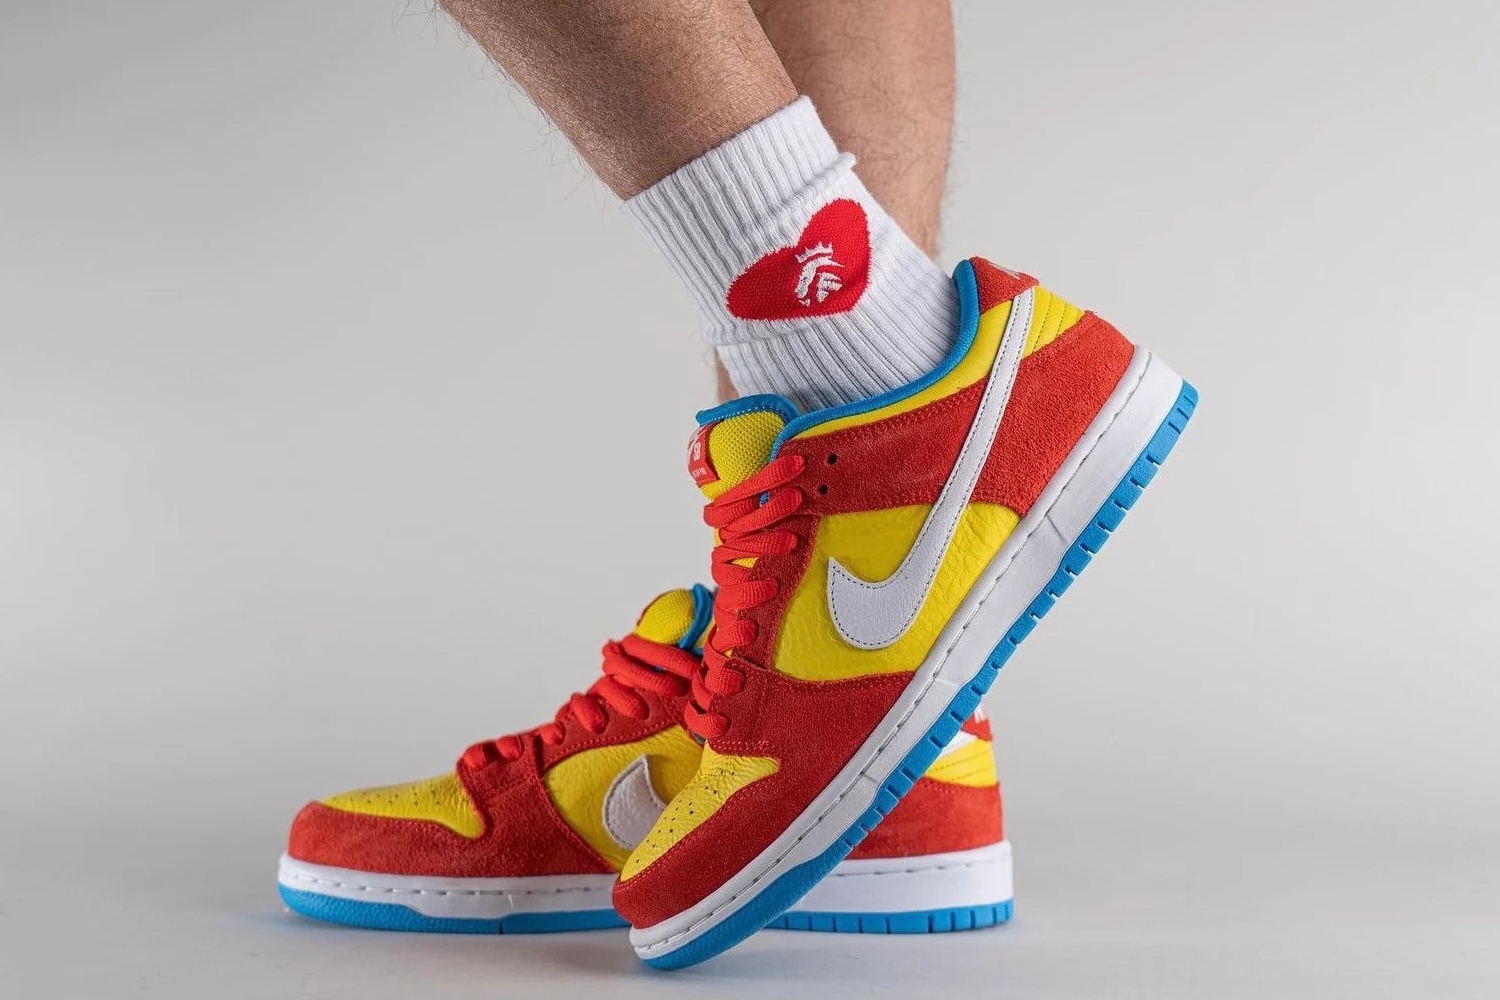 Check out the hottest cartoon inspired sneakers